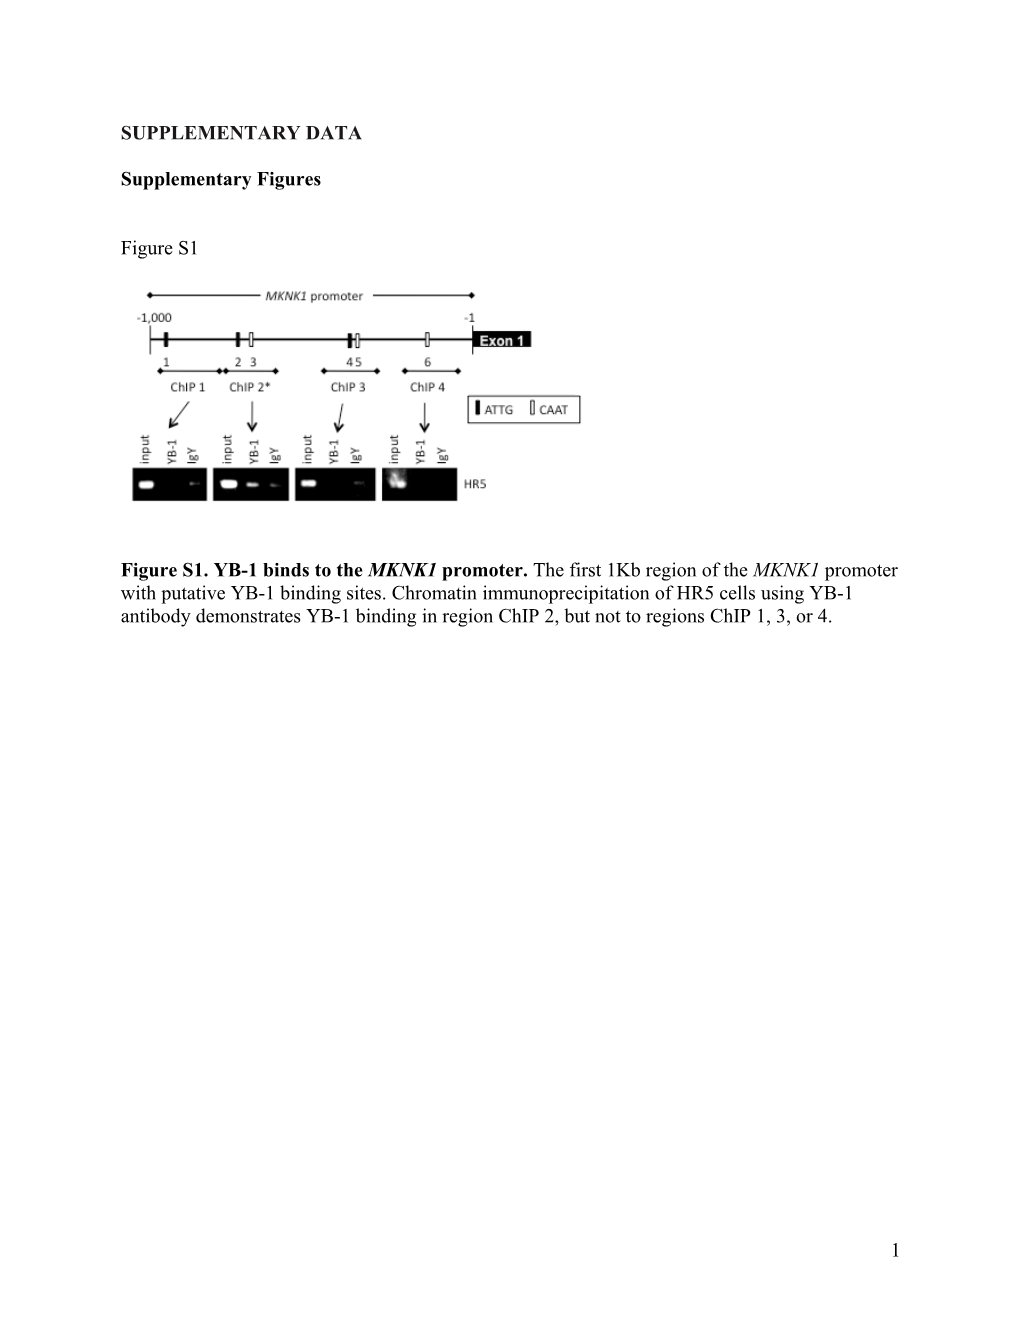 Figure 1: MNK1 and MNK2 Levels Are More Highly Expressed in the Resistant Cells